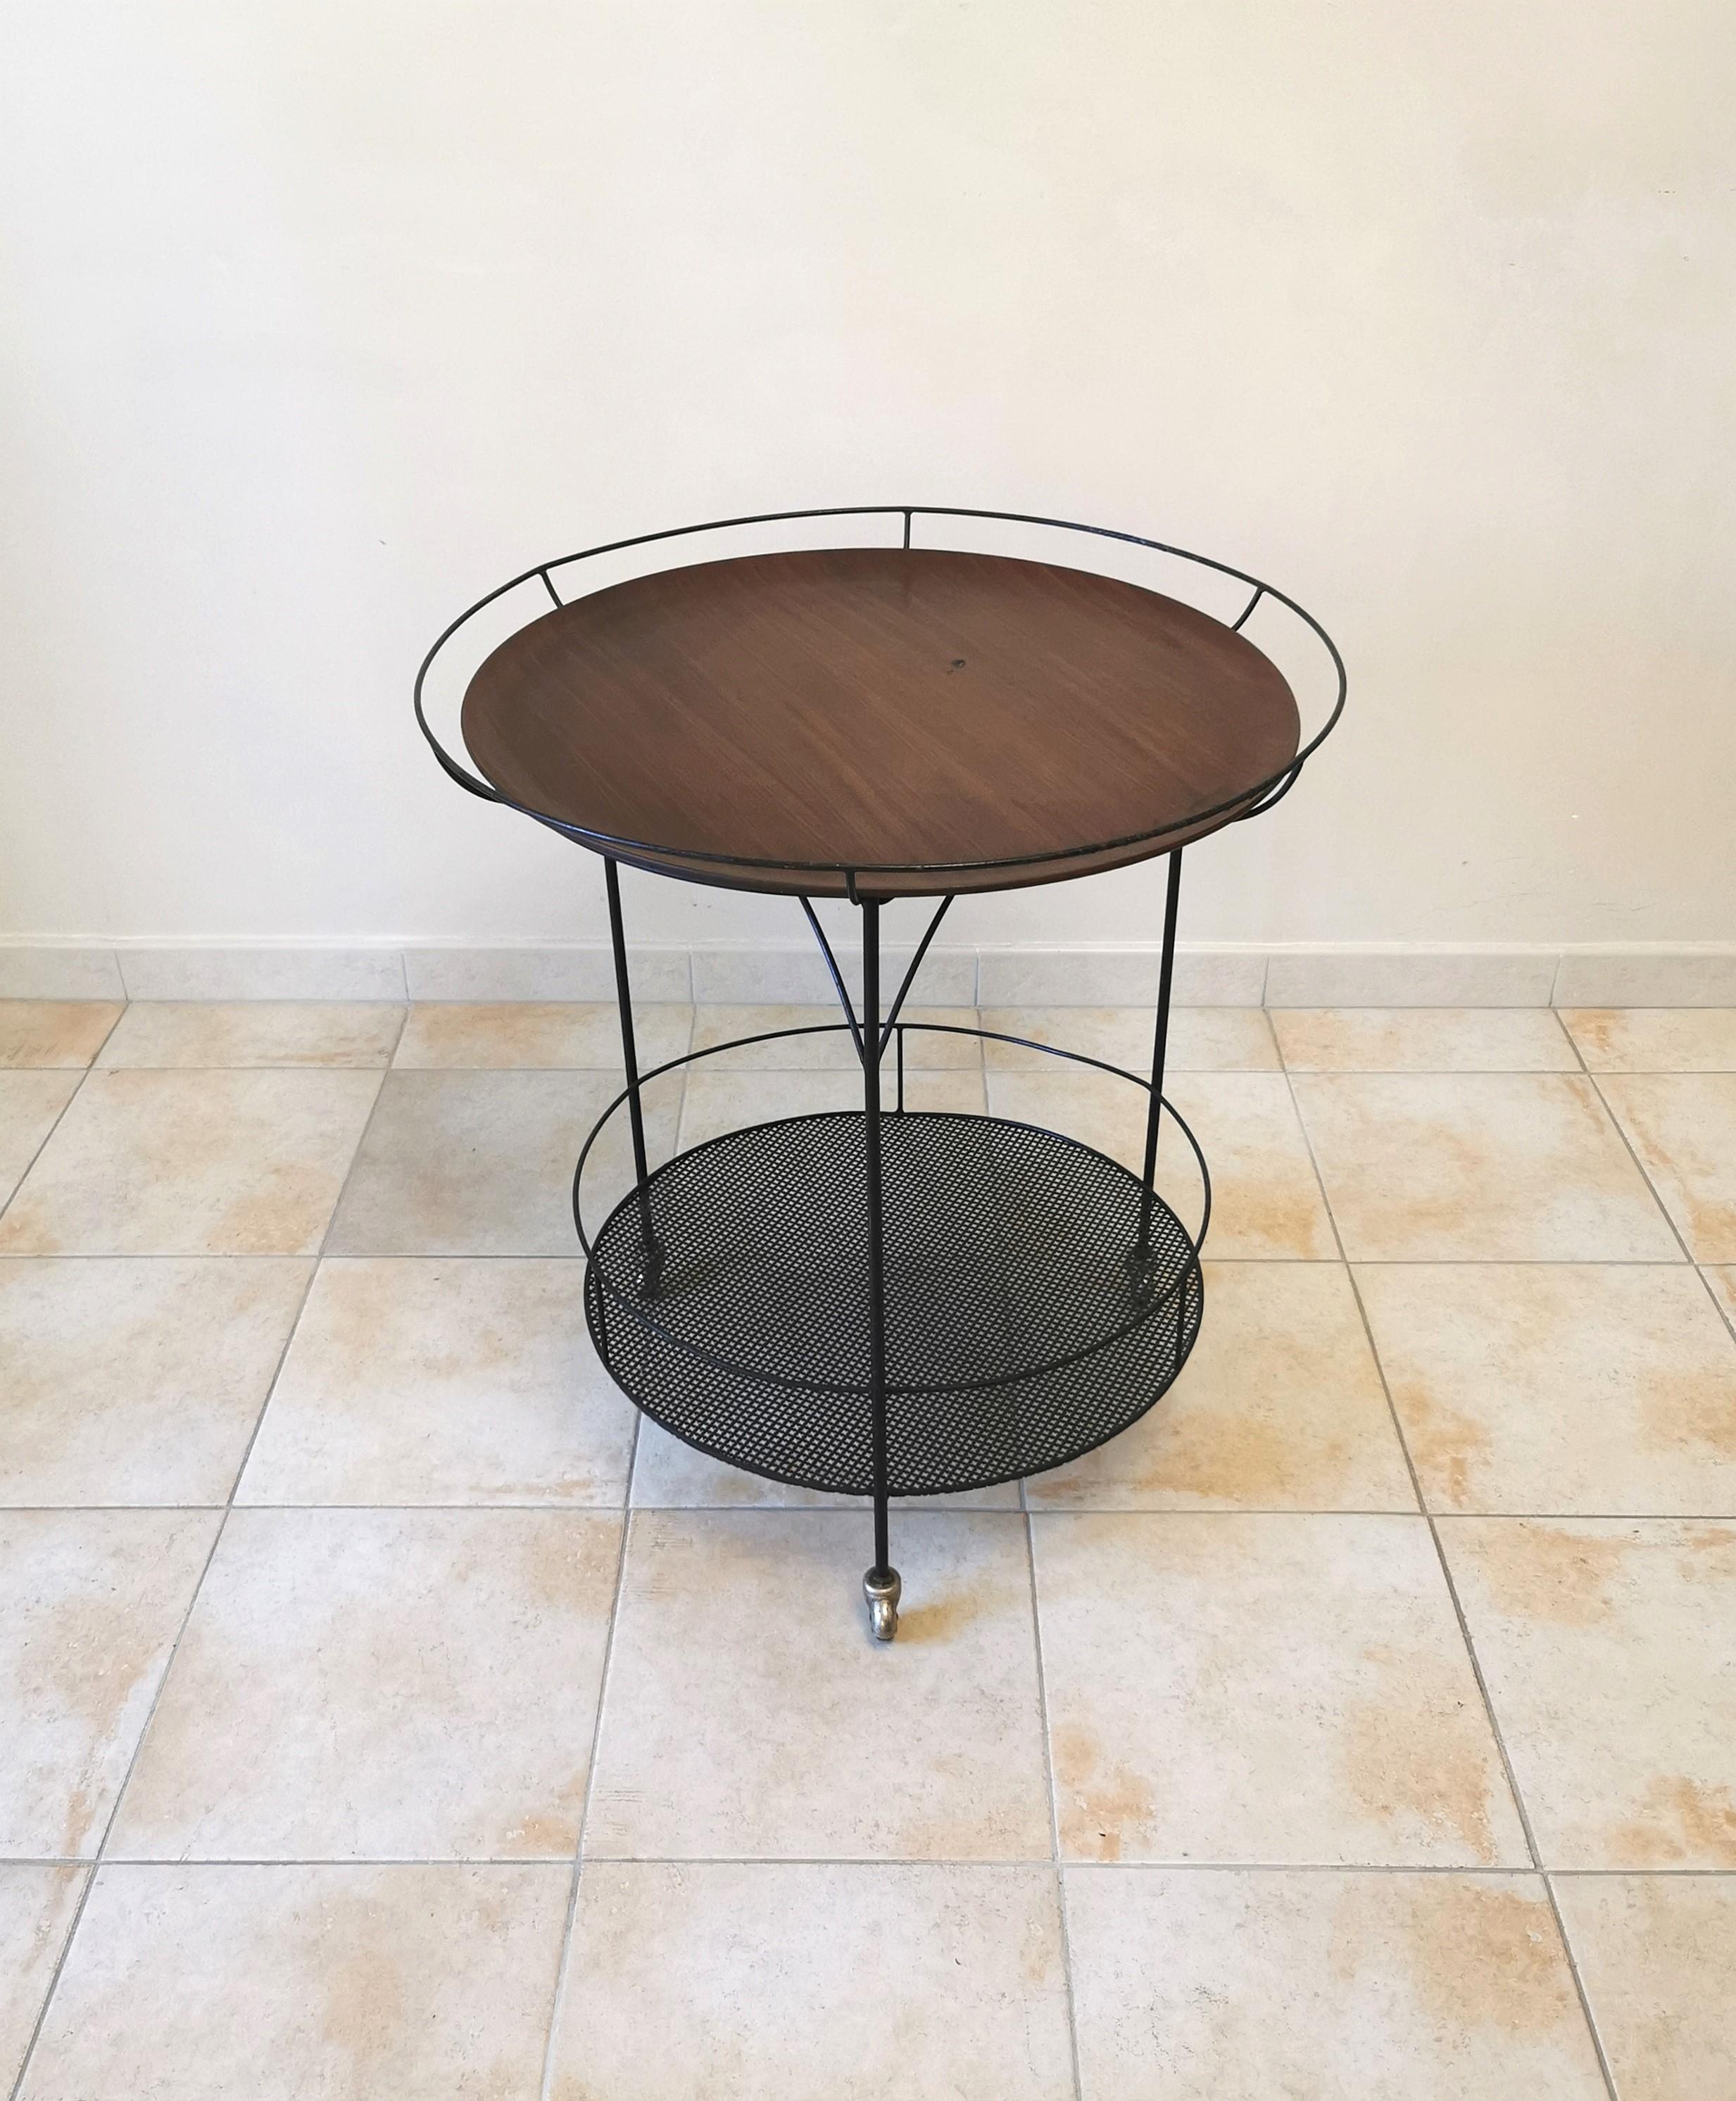 Bar cart/food holder on wheels made in Italy in the 60s. The bar cart has a black enamelled metal structure with a perforated lower shelf and a removable circular wooden shelf.



Note: We try to offer our customers an excellent service even in